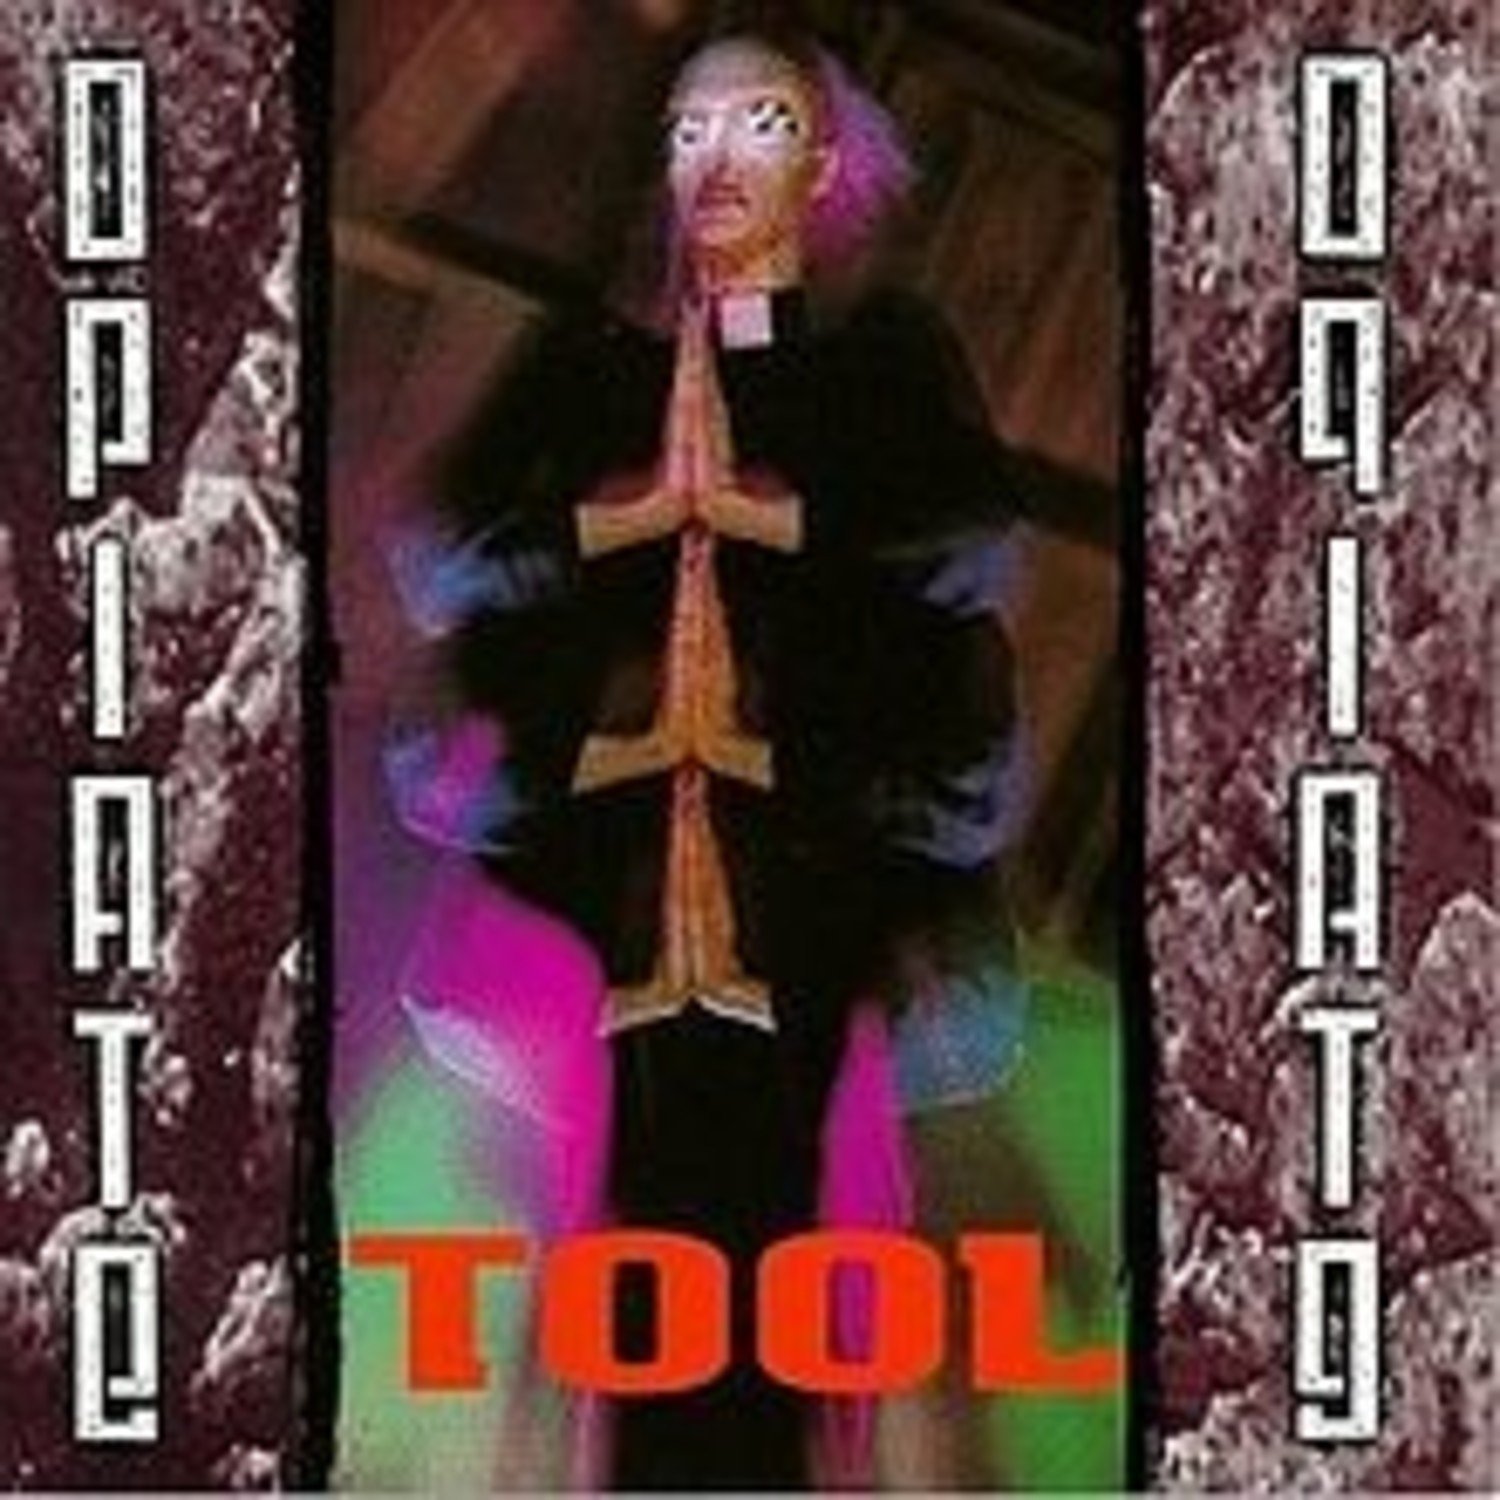 Tool: Vinyl Record Collection - 3 Albums Opiate India